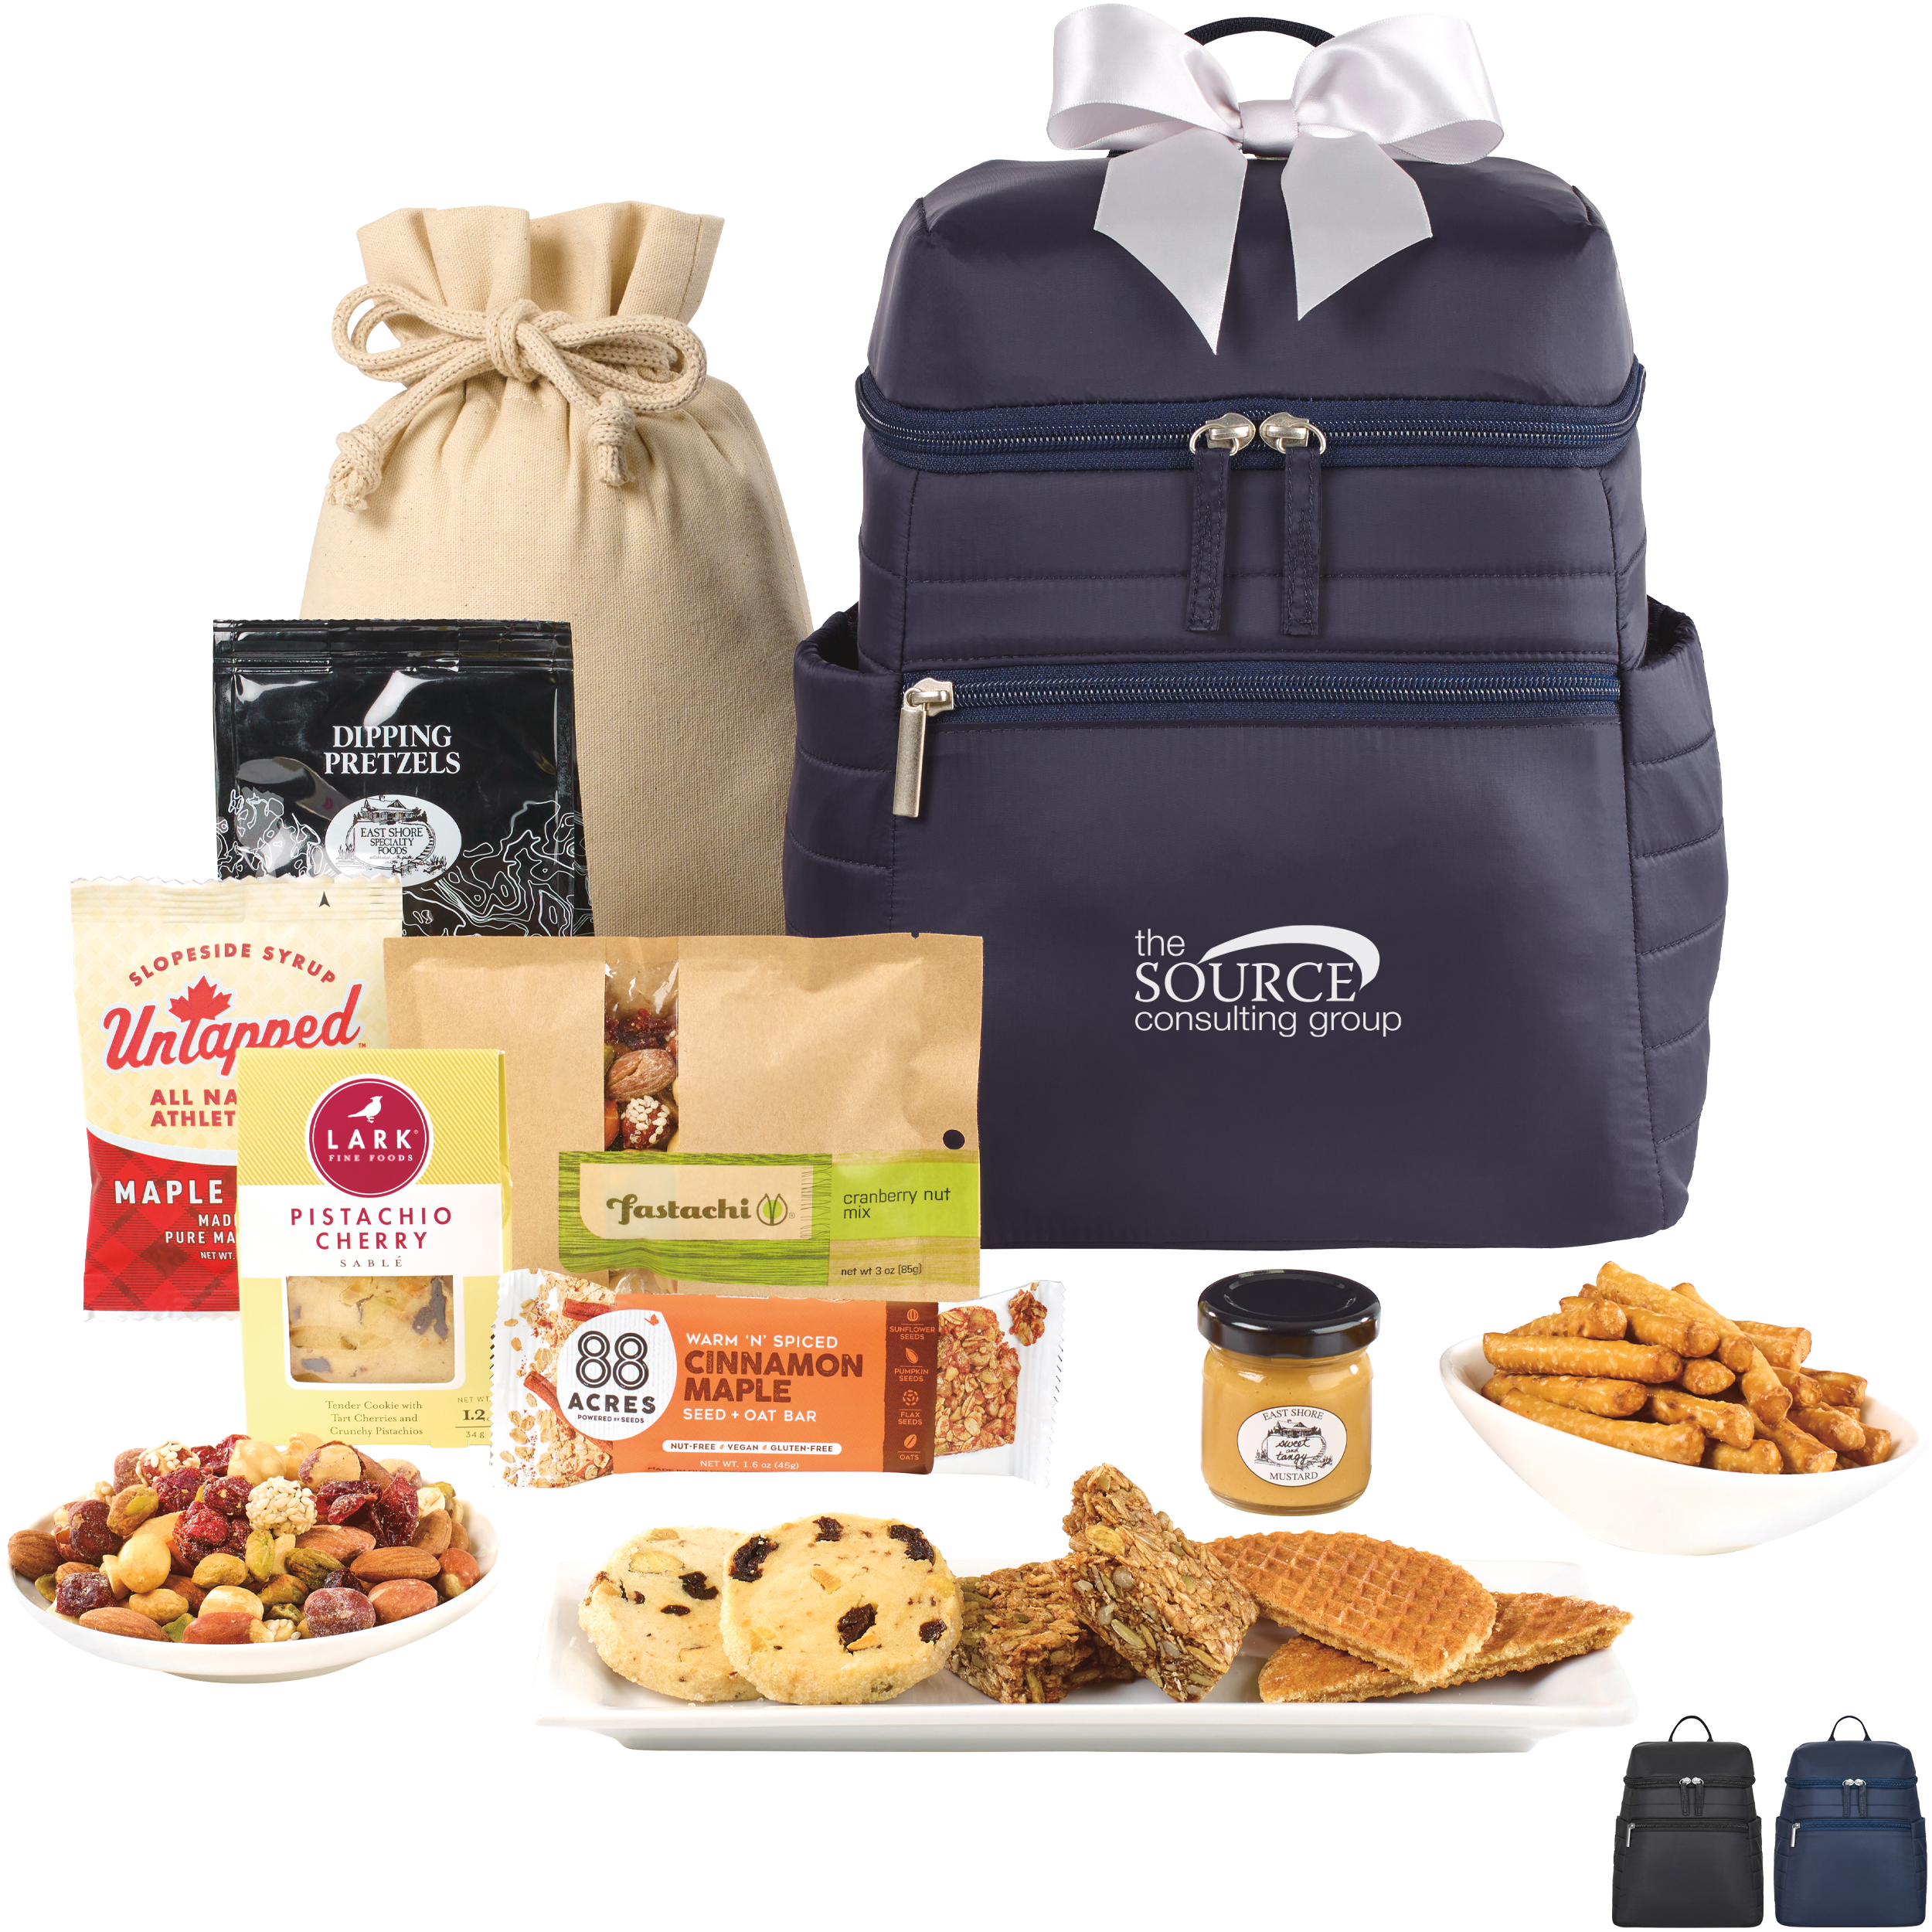 Cooler/Lunch Bag & Eco Food Container Gift Set with Holiday Gift Card -  Personalization Available